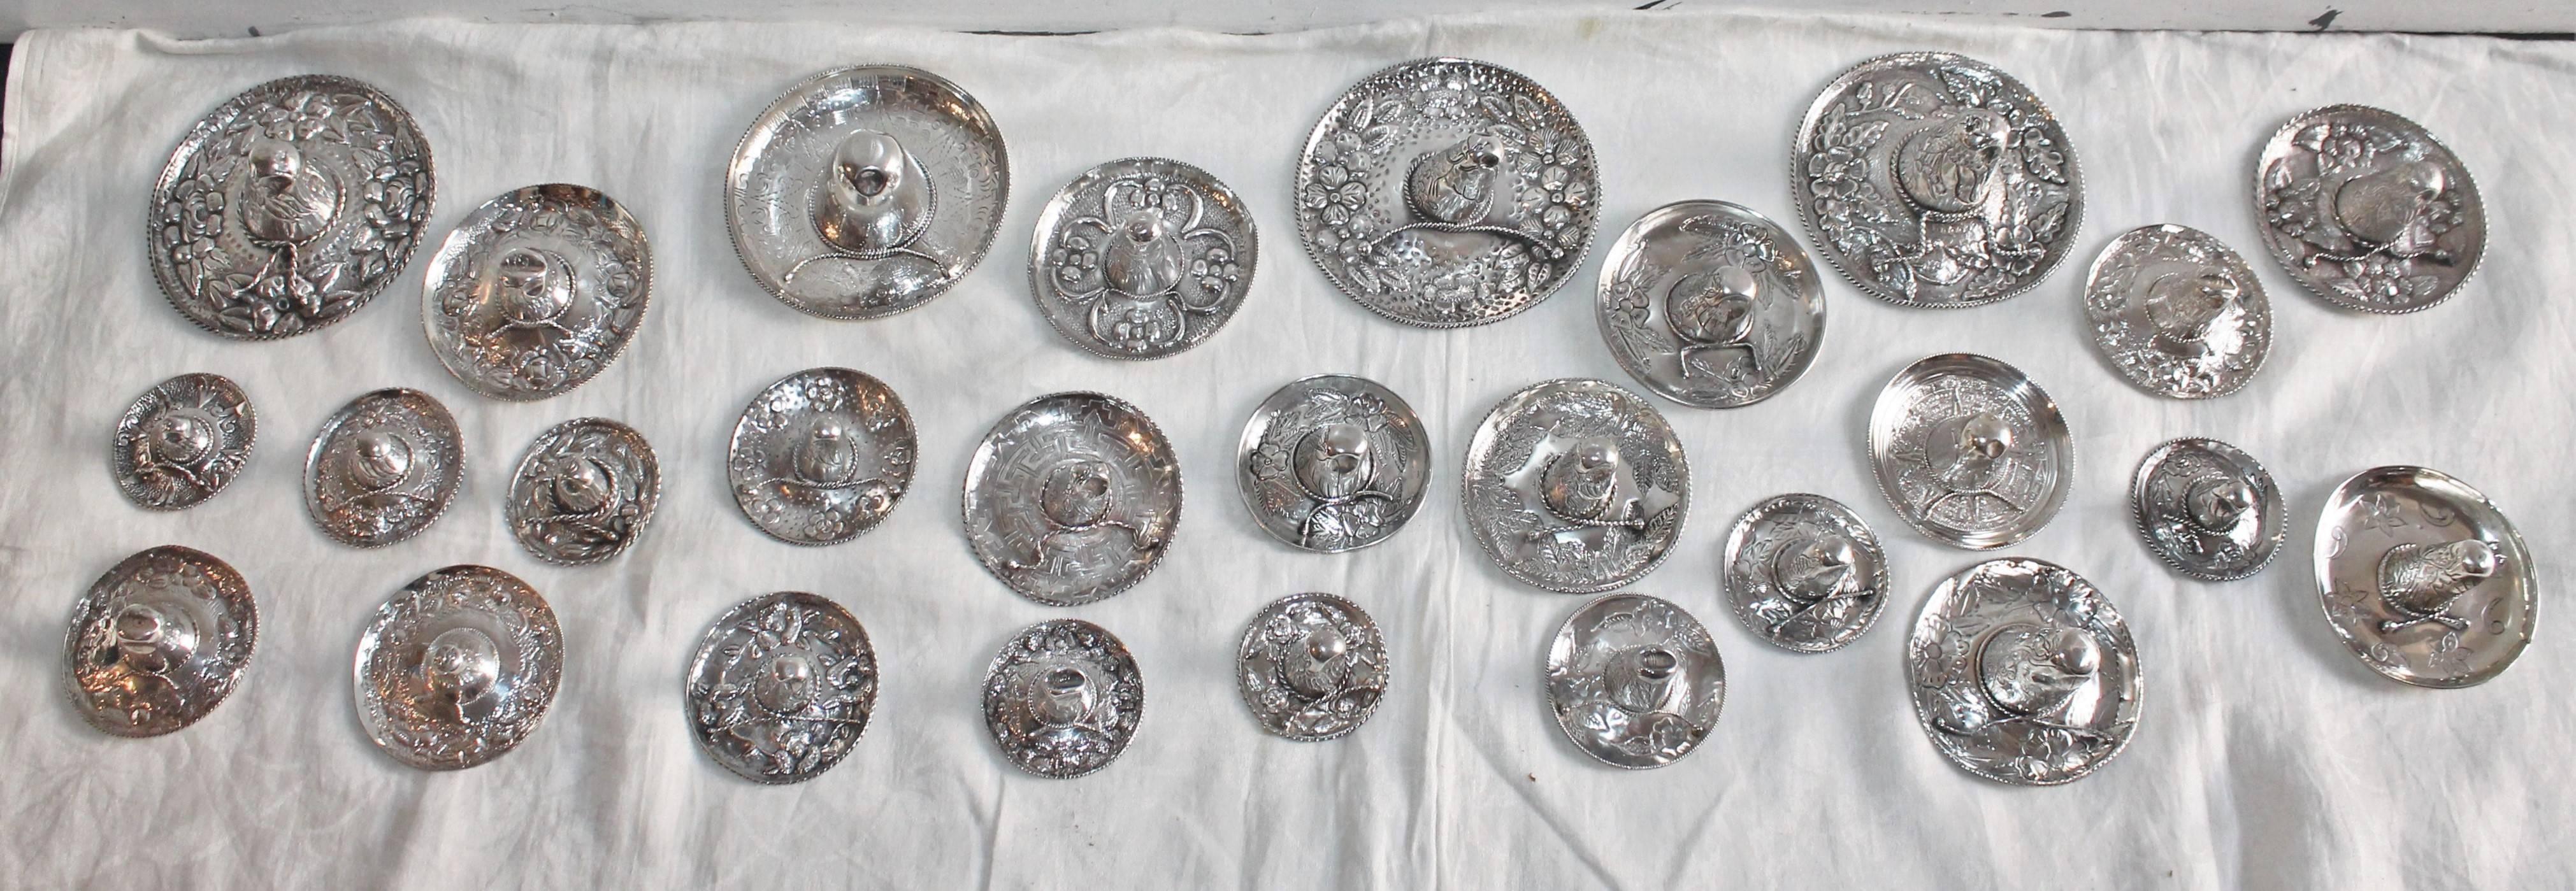 This is an amazing collection a very long time in the making. We believe all items in this listing are made in Mexico. As shown in the images these are 925/1000 in silver content. All sombreros have been polished and checked for quality. All have